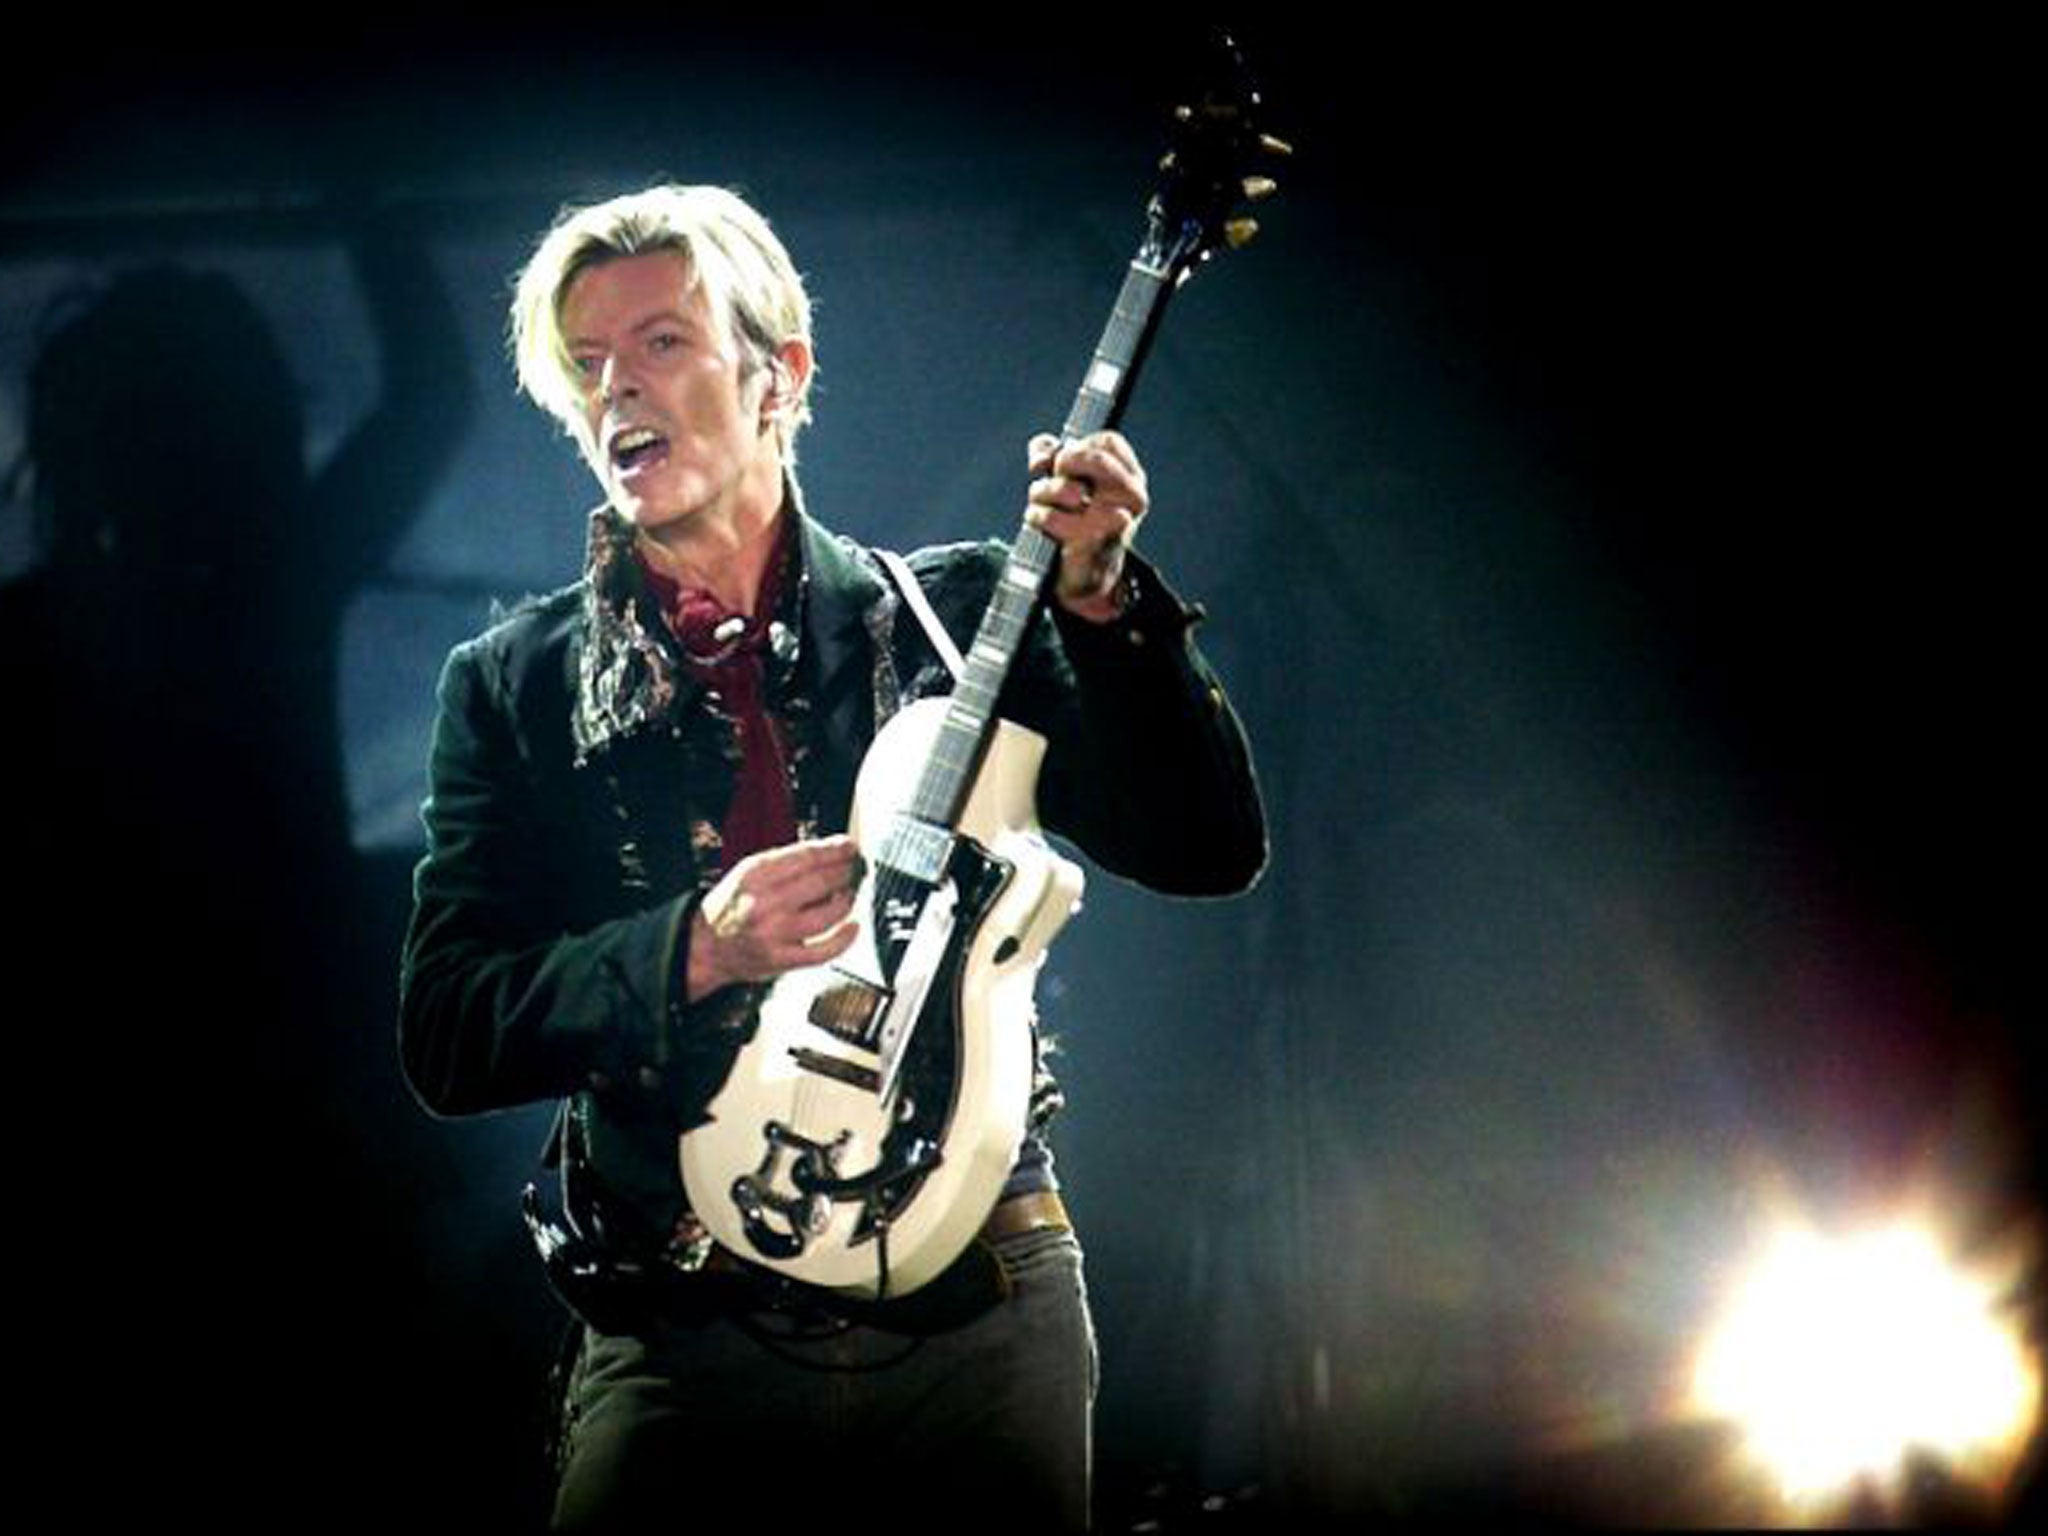 The surprise return of David Bowie, after a decade resting on his laurels, appears to have delivered a kick up the backside to other music stars who have been content to sit back and count their royalties